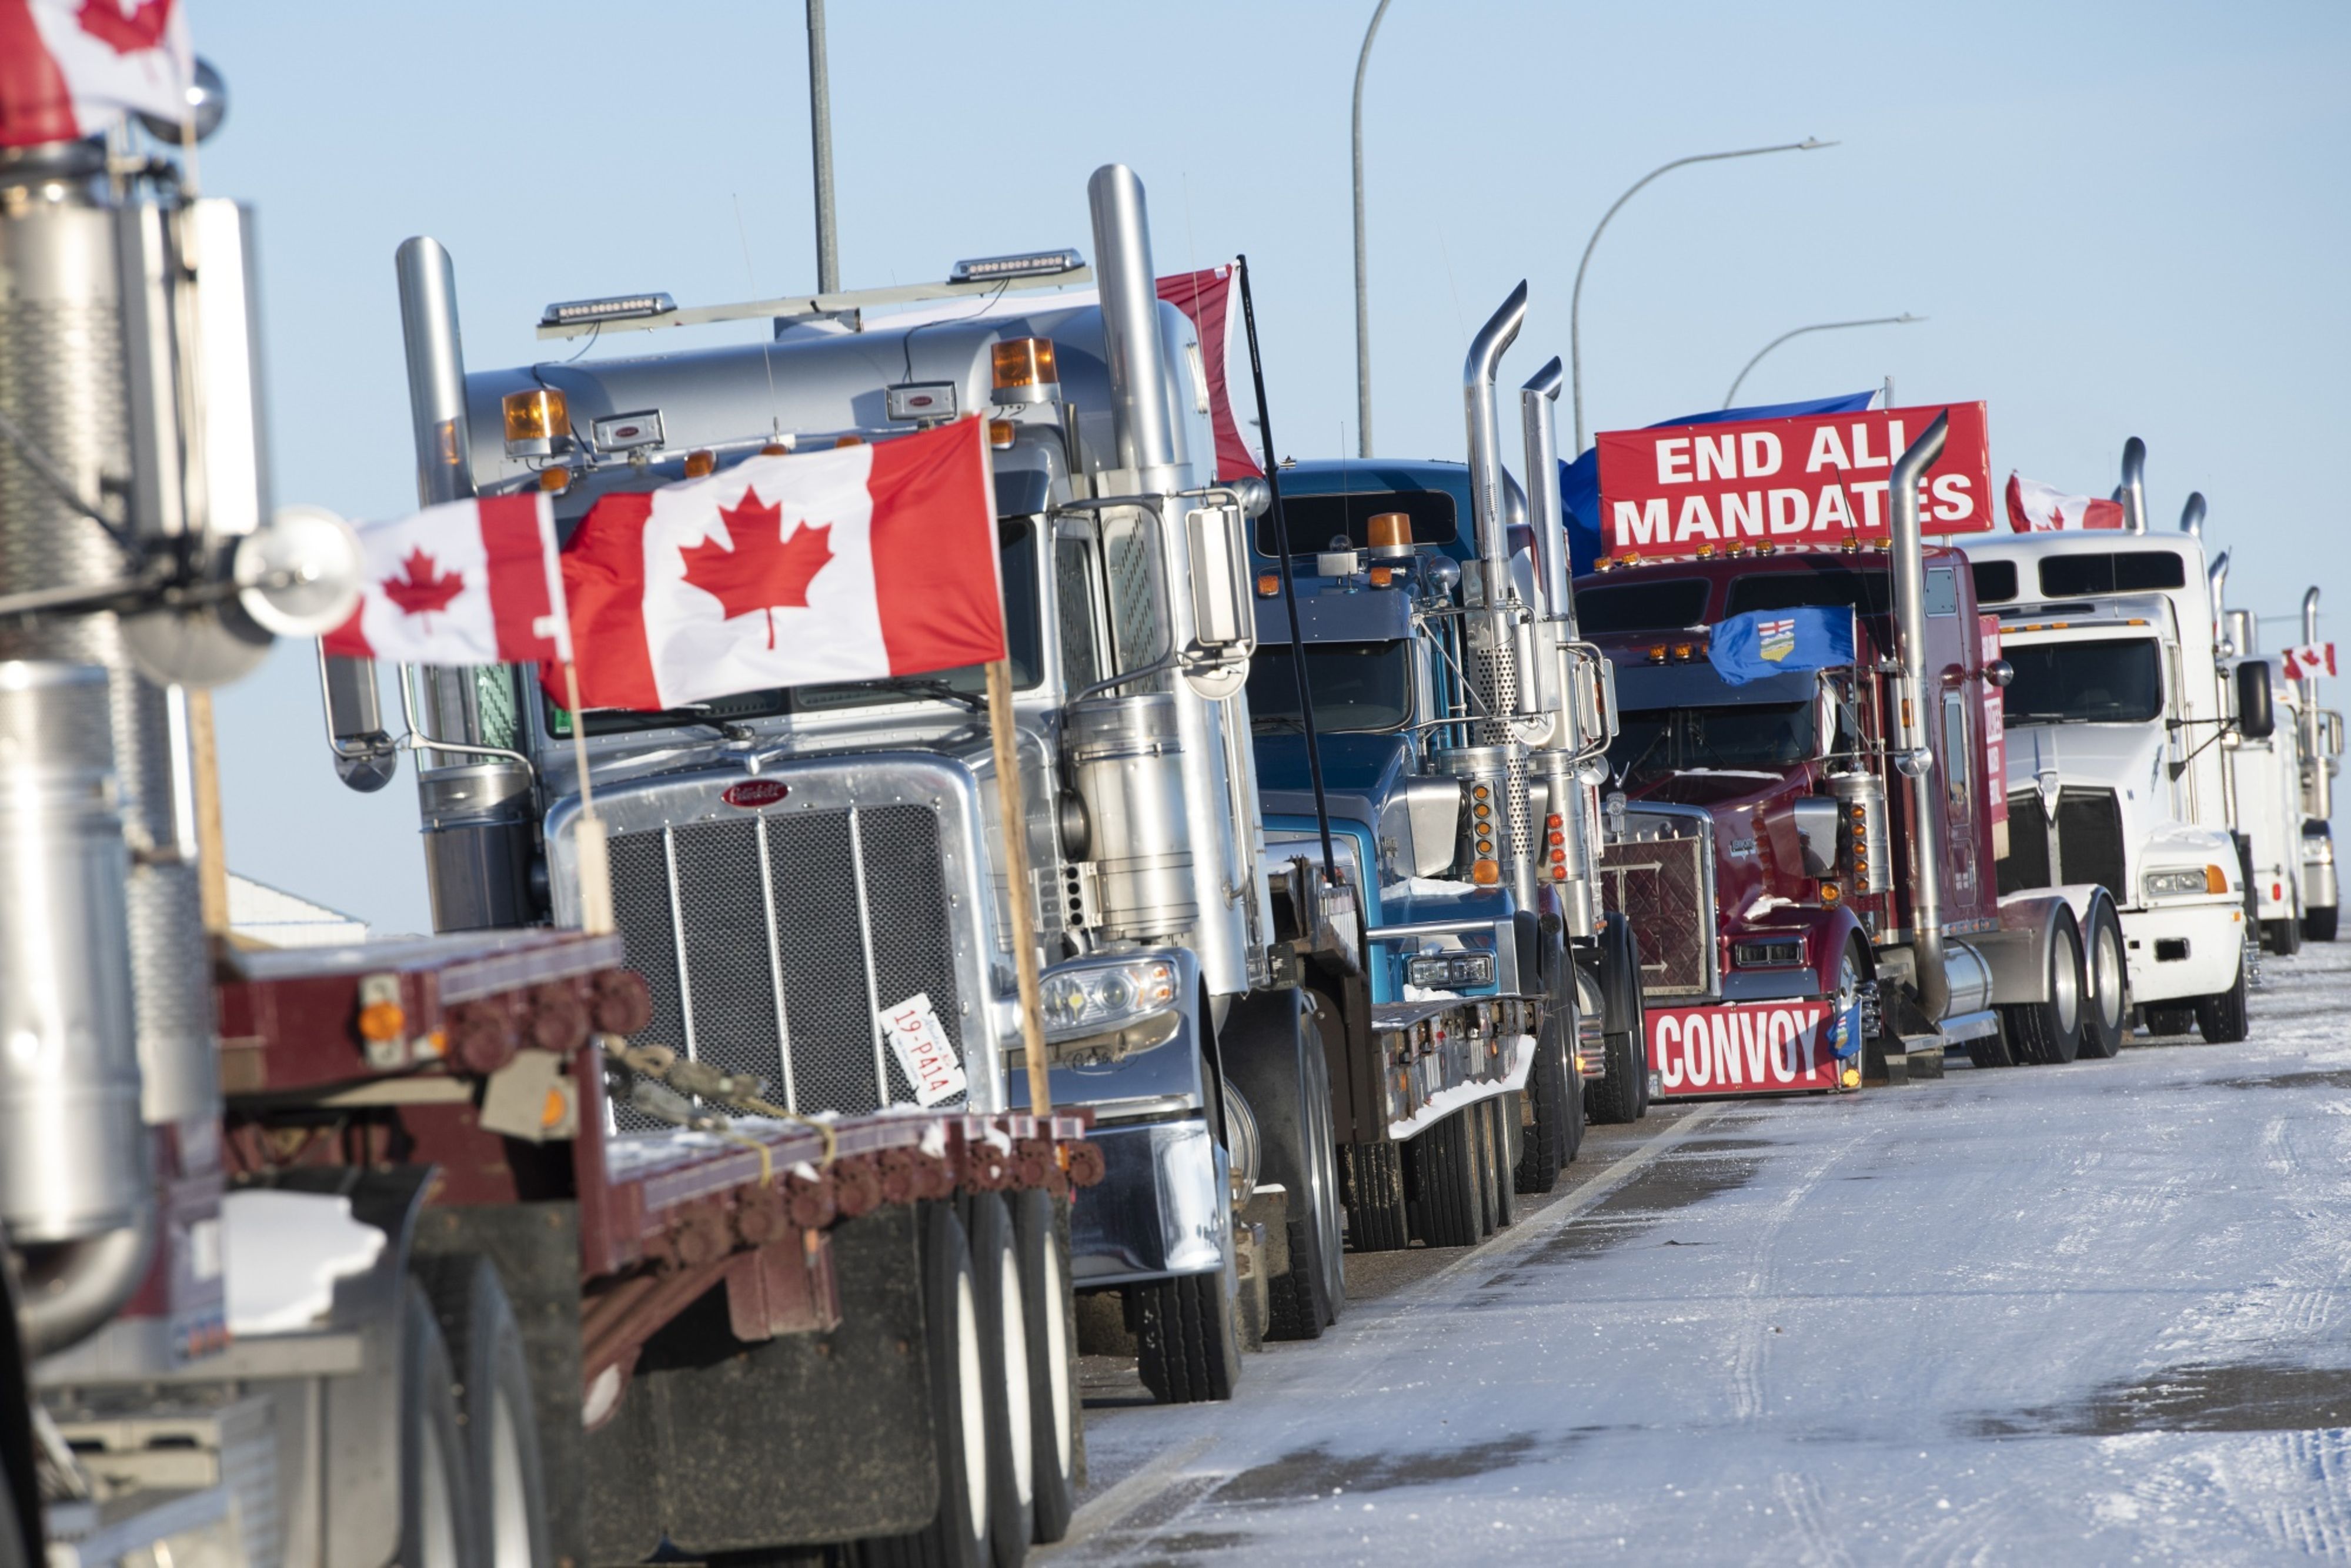 Lines of trucks block the U.S.-Canada border during a demonstration in Coutts, Alberta, Canada, on Feb. 2. (Bloomberg—© 2022 Bloomberg Finance LP)